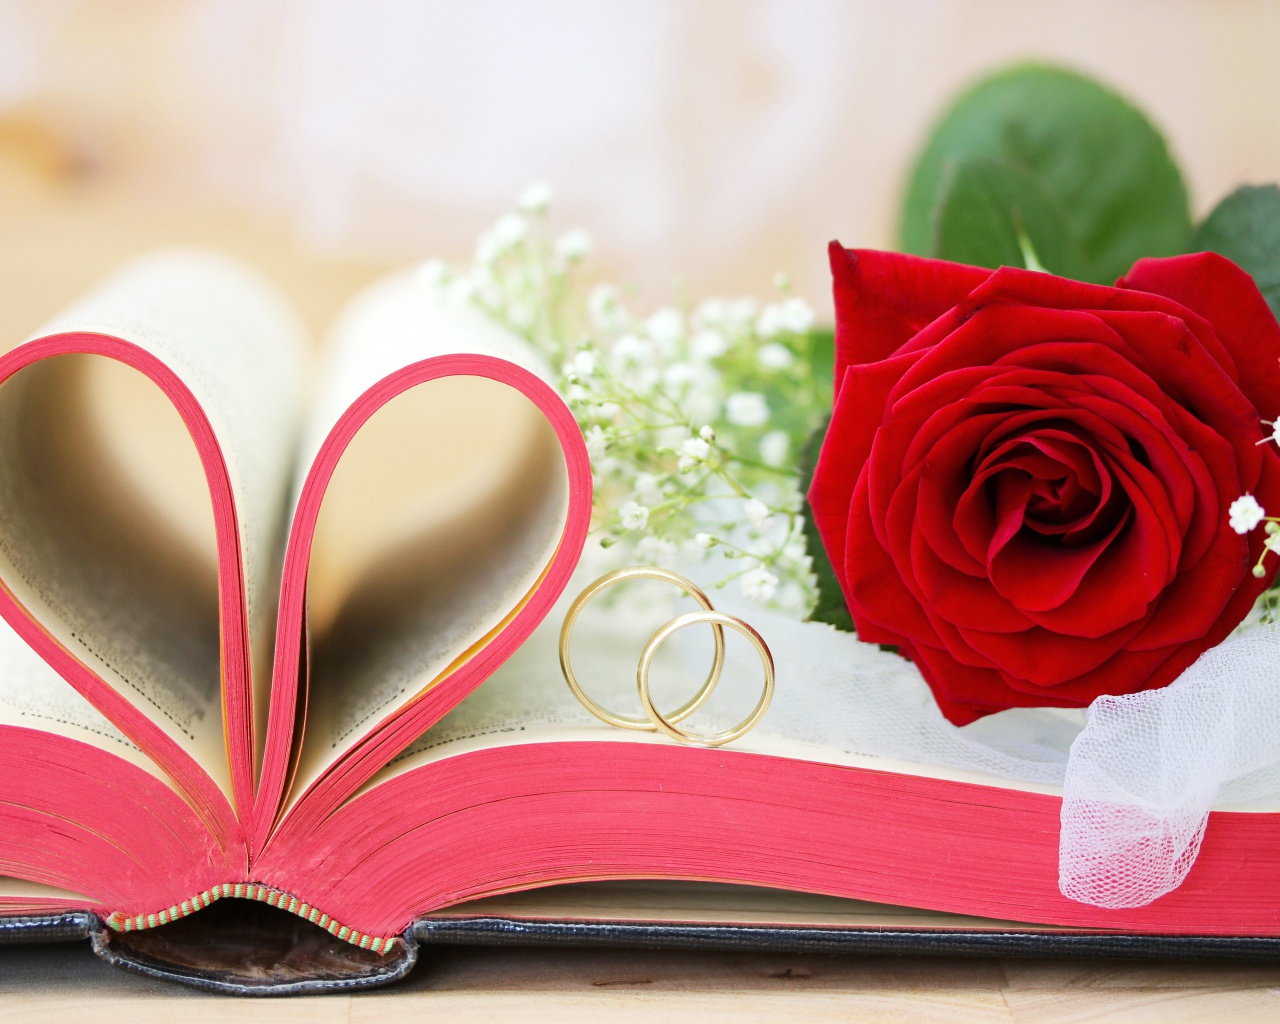 Wedding rings and book wallpaper 1280x1024